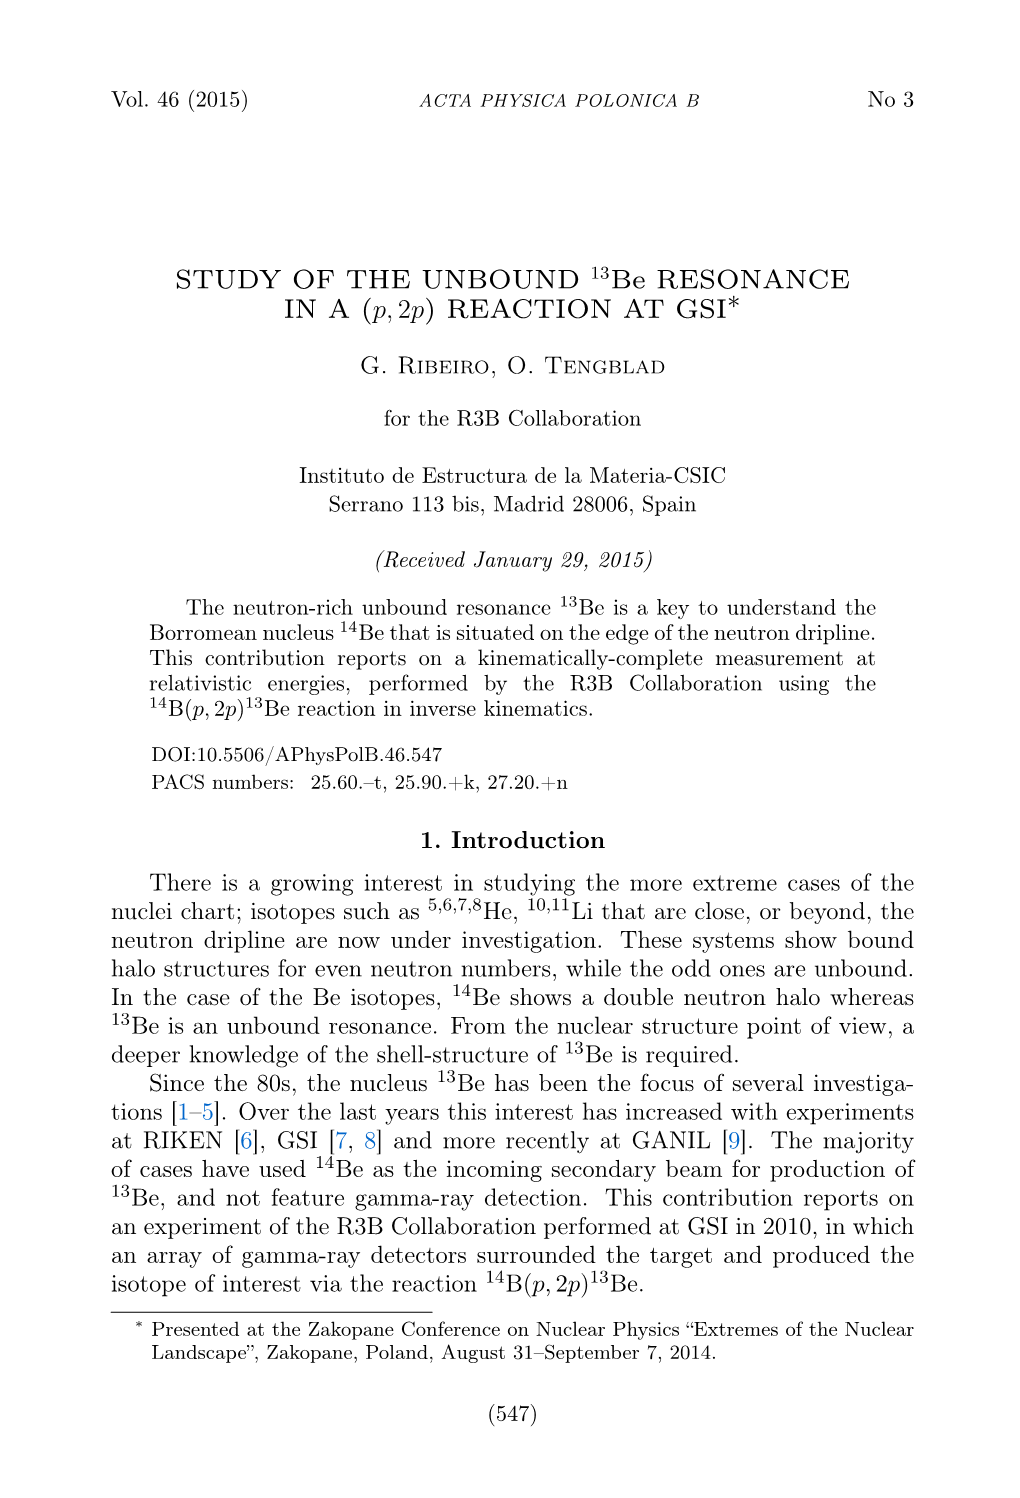 Study of the Unbound 13Be Resonance in a (P,2P) Reaction At